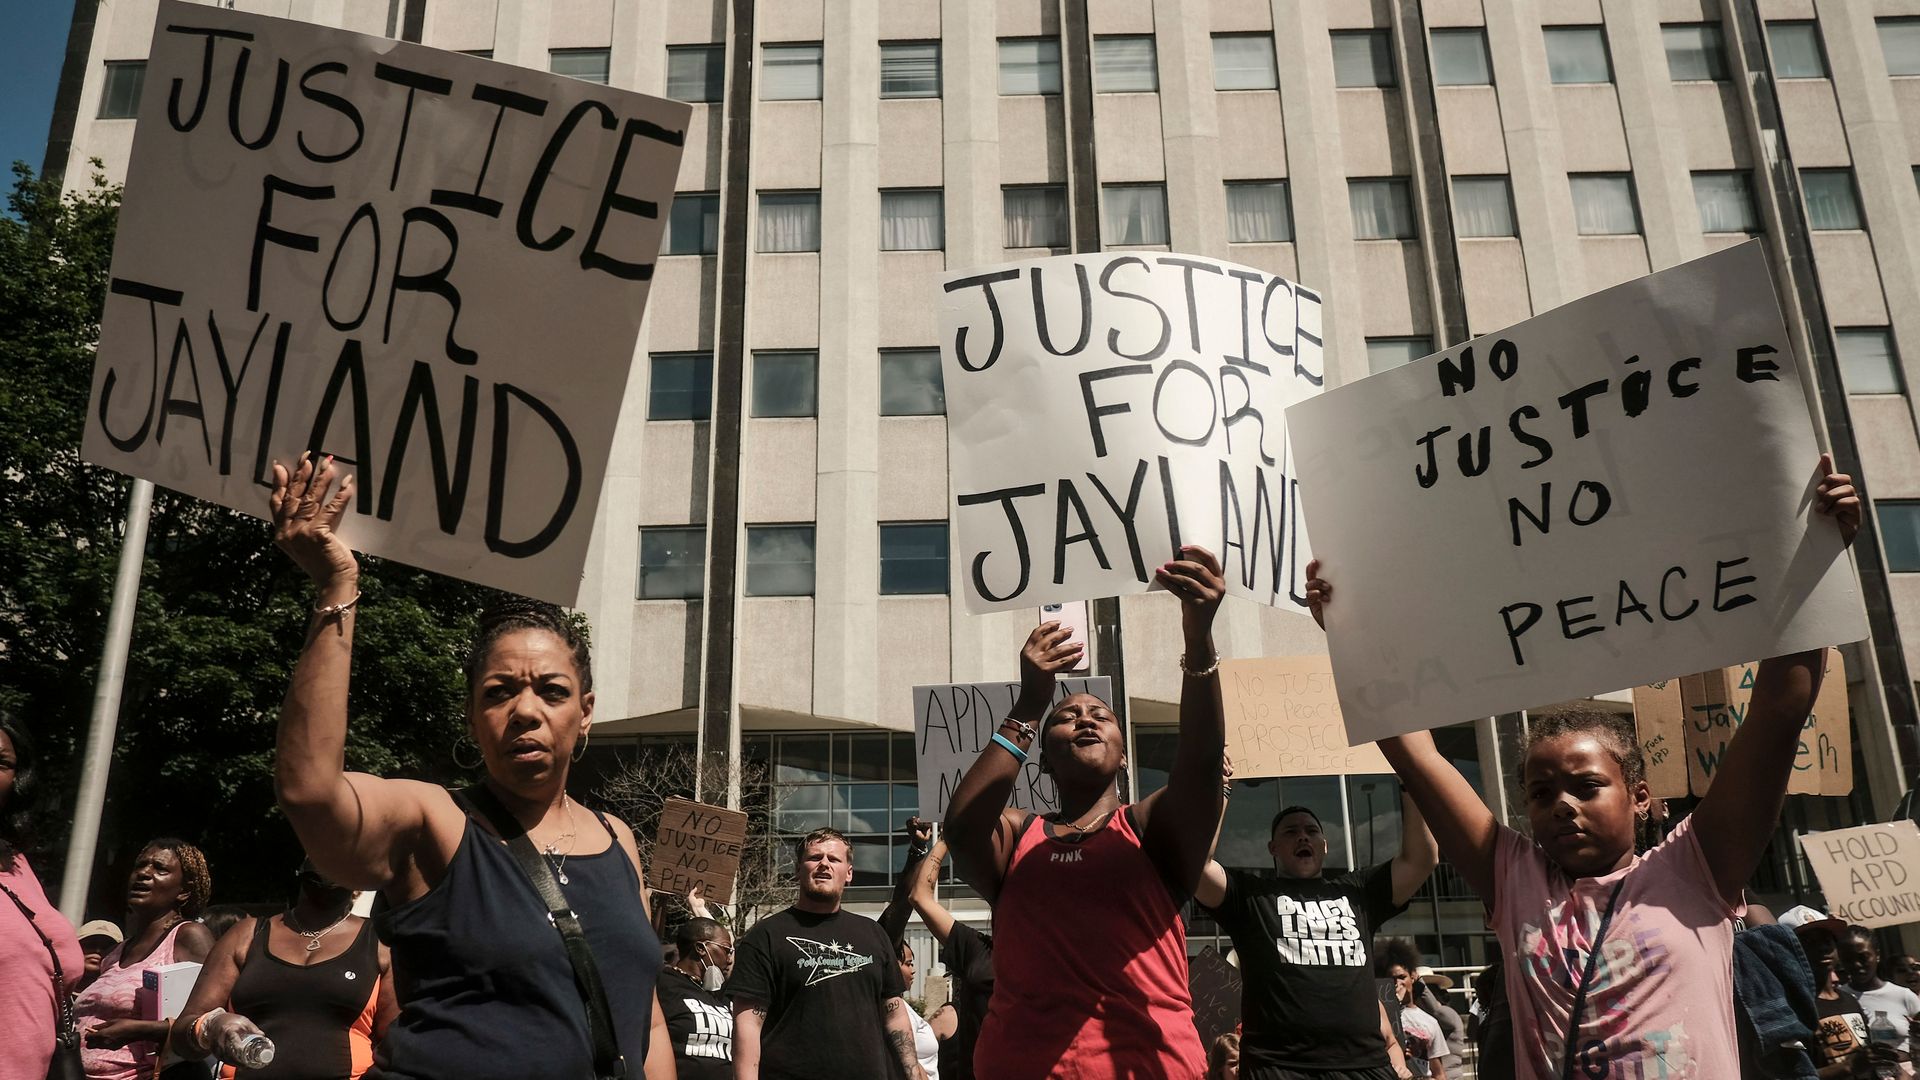 Protestors hold signs reading "Justice for Jayland" in Akron.